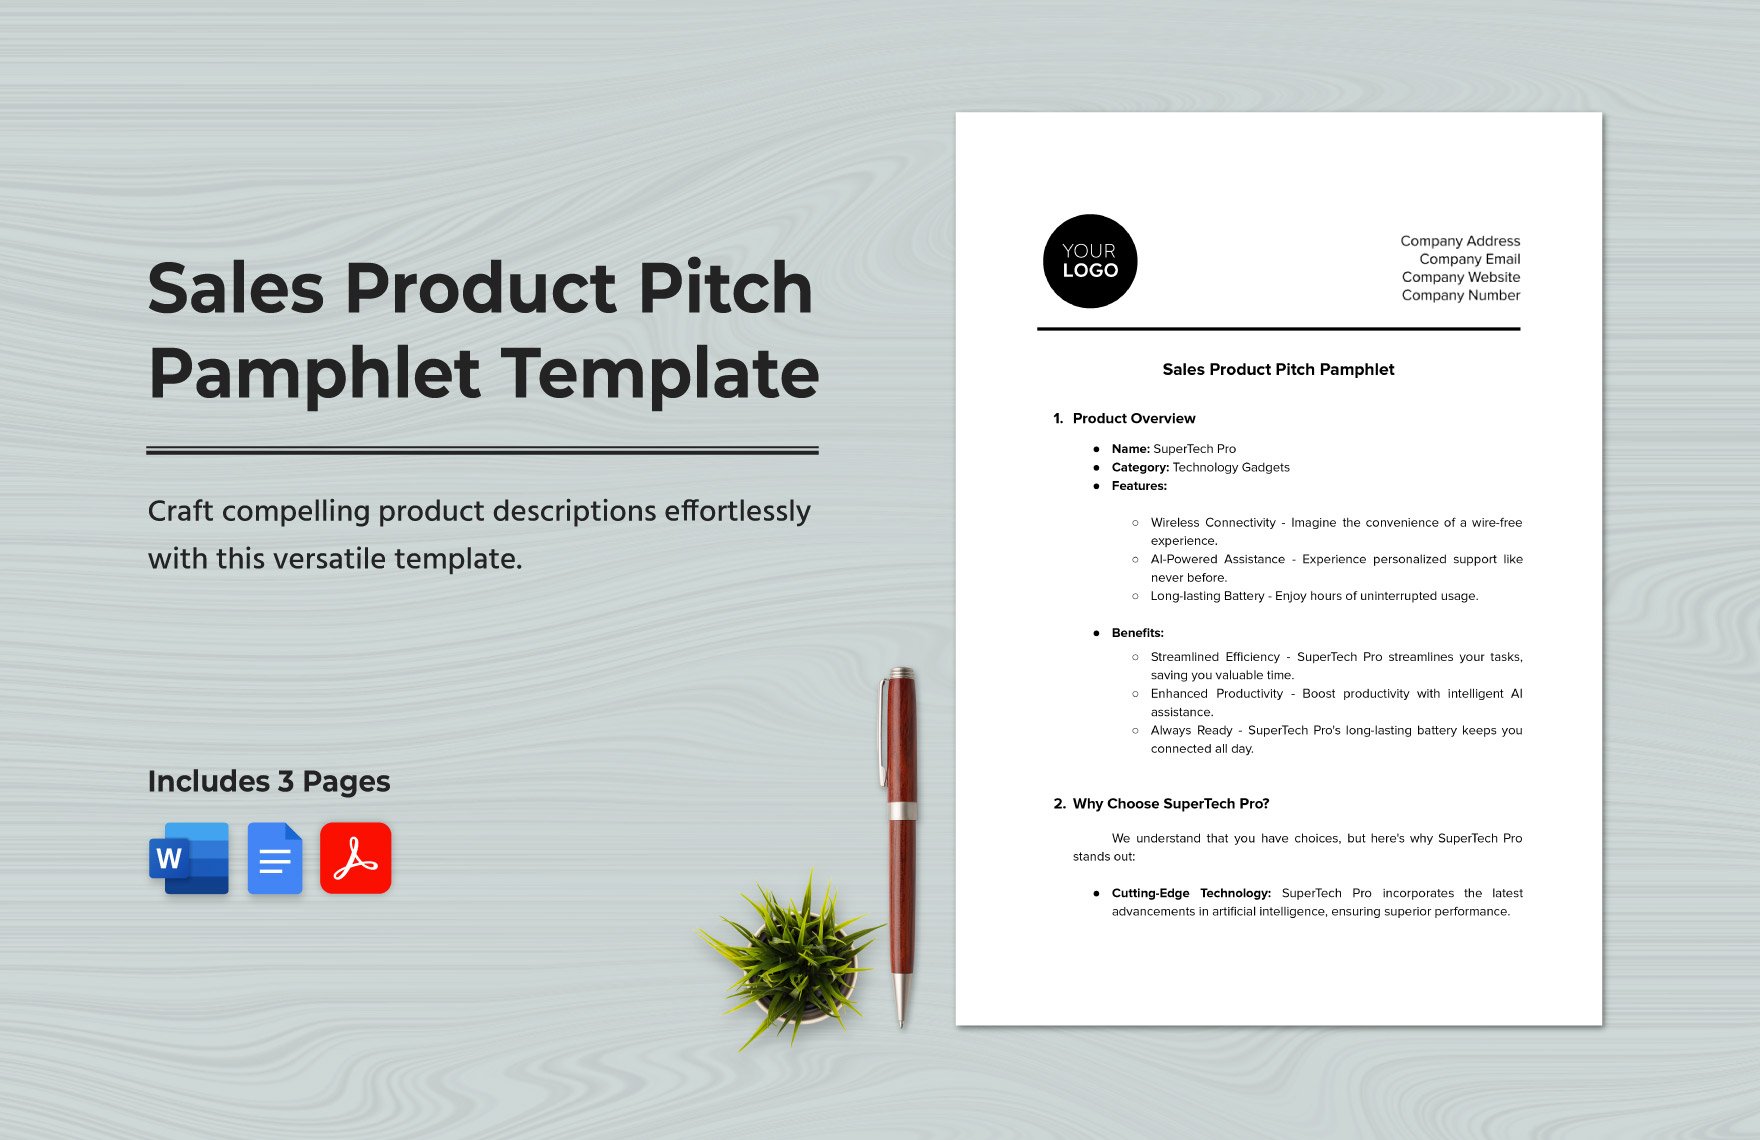 Sales Product Pitch Pamphlet Template in Word, Google Docs, PDF